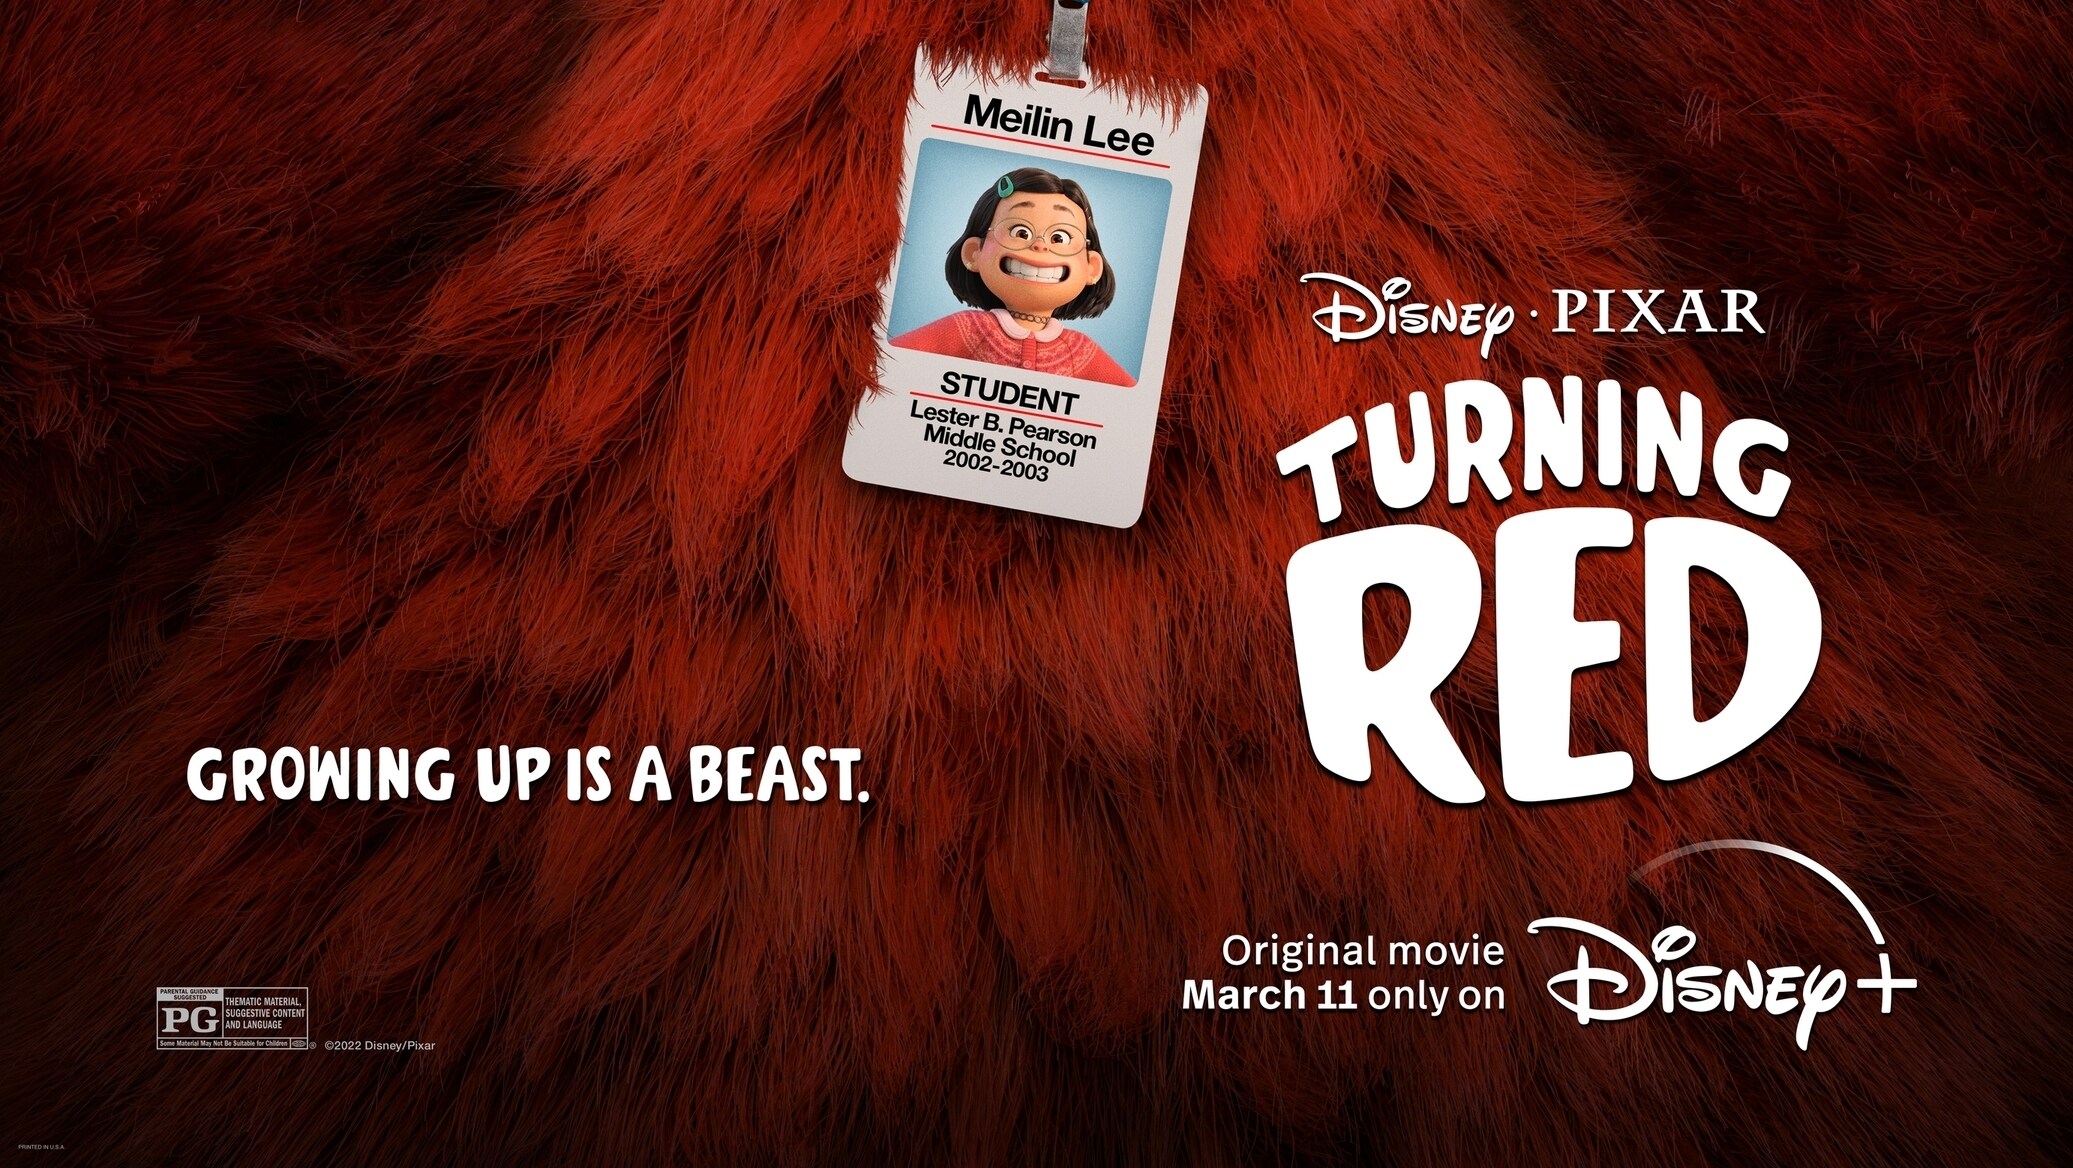 ONE MONTH UNTIL DISNEY AND PIXAR’S “TURNING RED” LAUNCHES ON DISNEY+ 11 MARCH